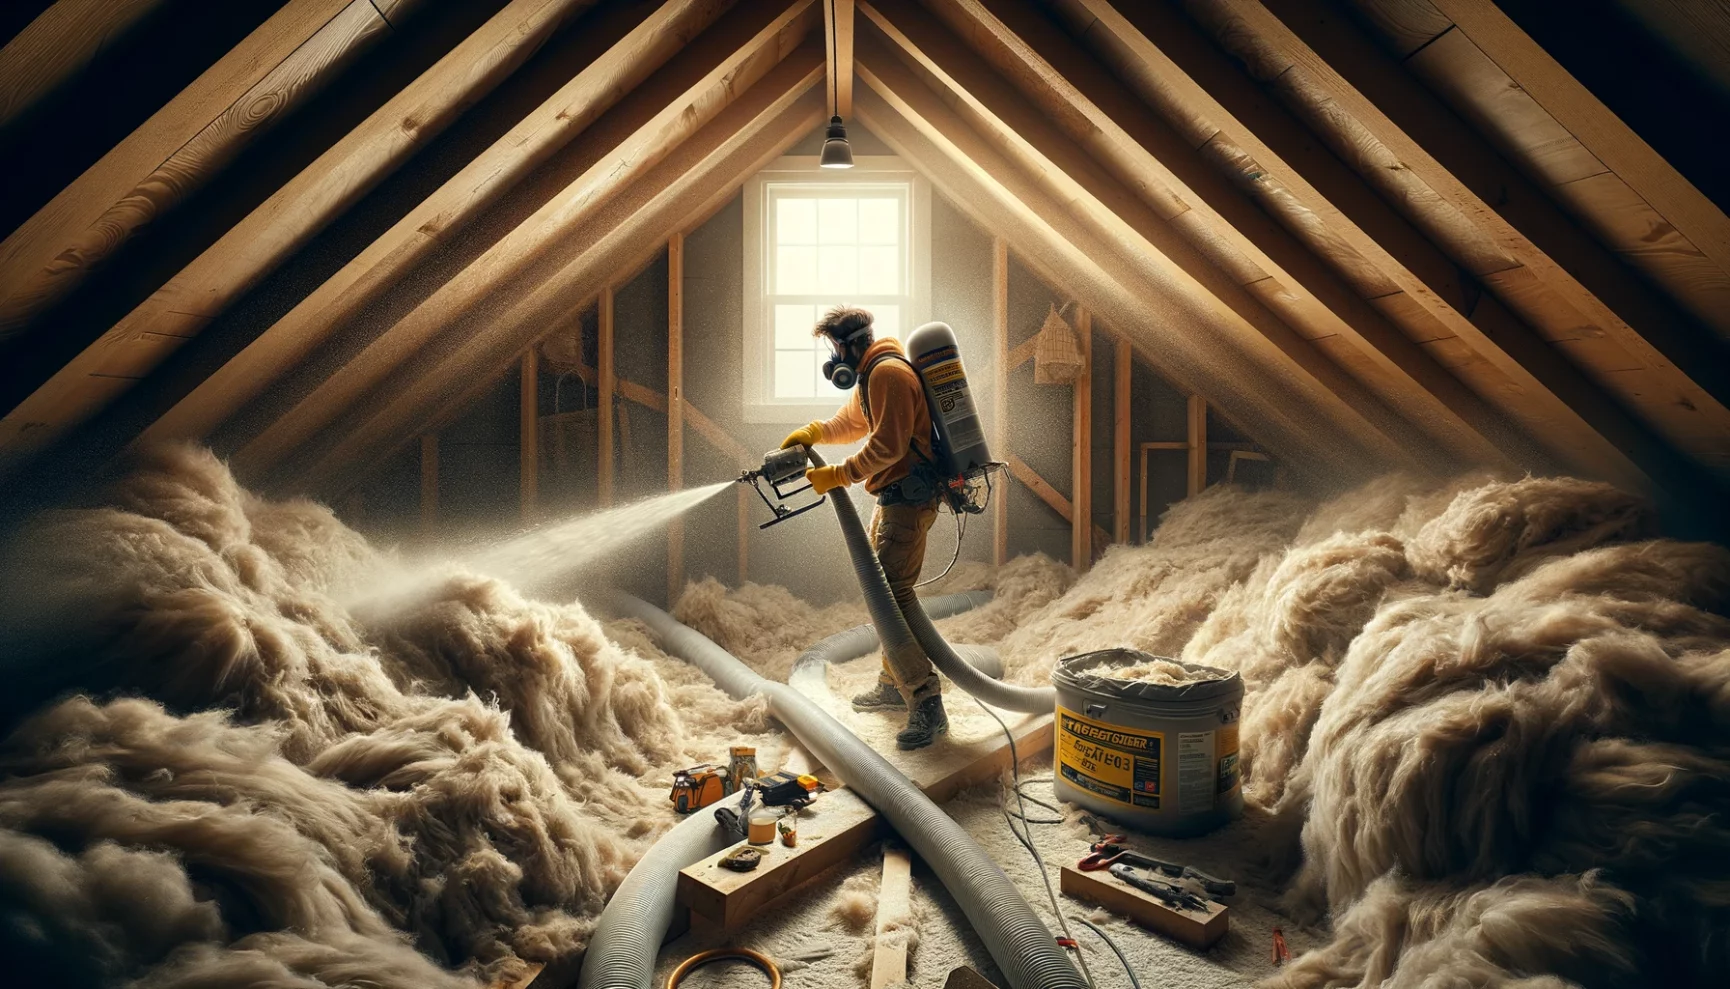 Worker installing insulation in an attic using a hose.